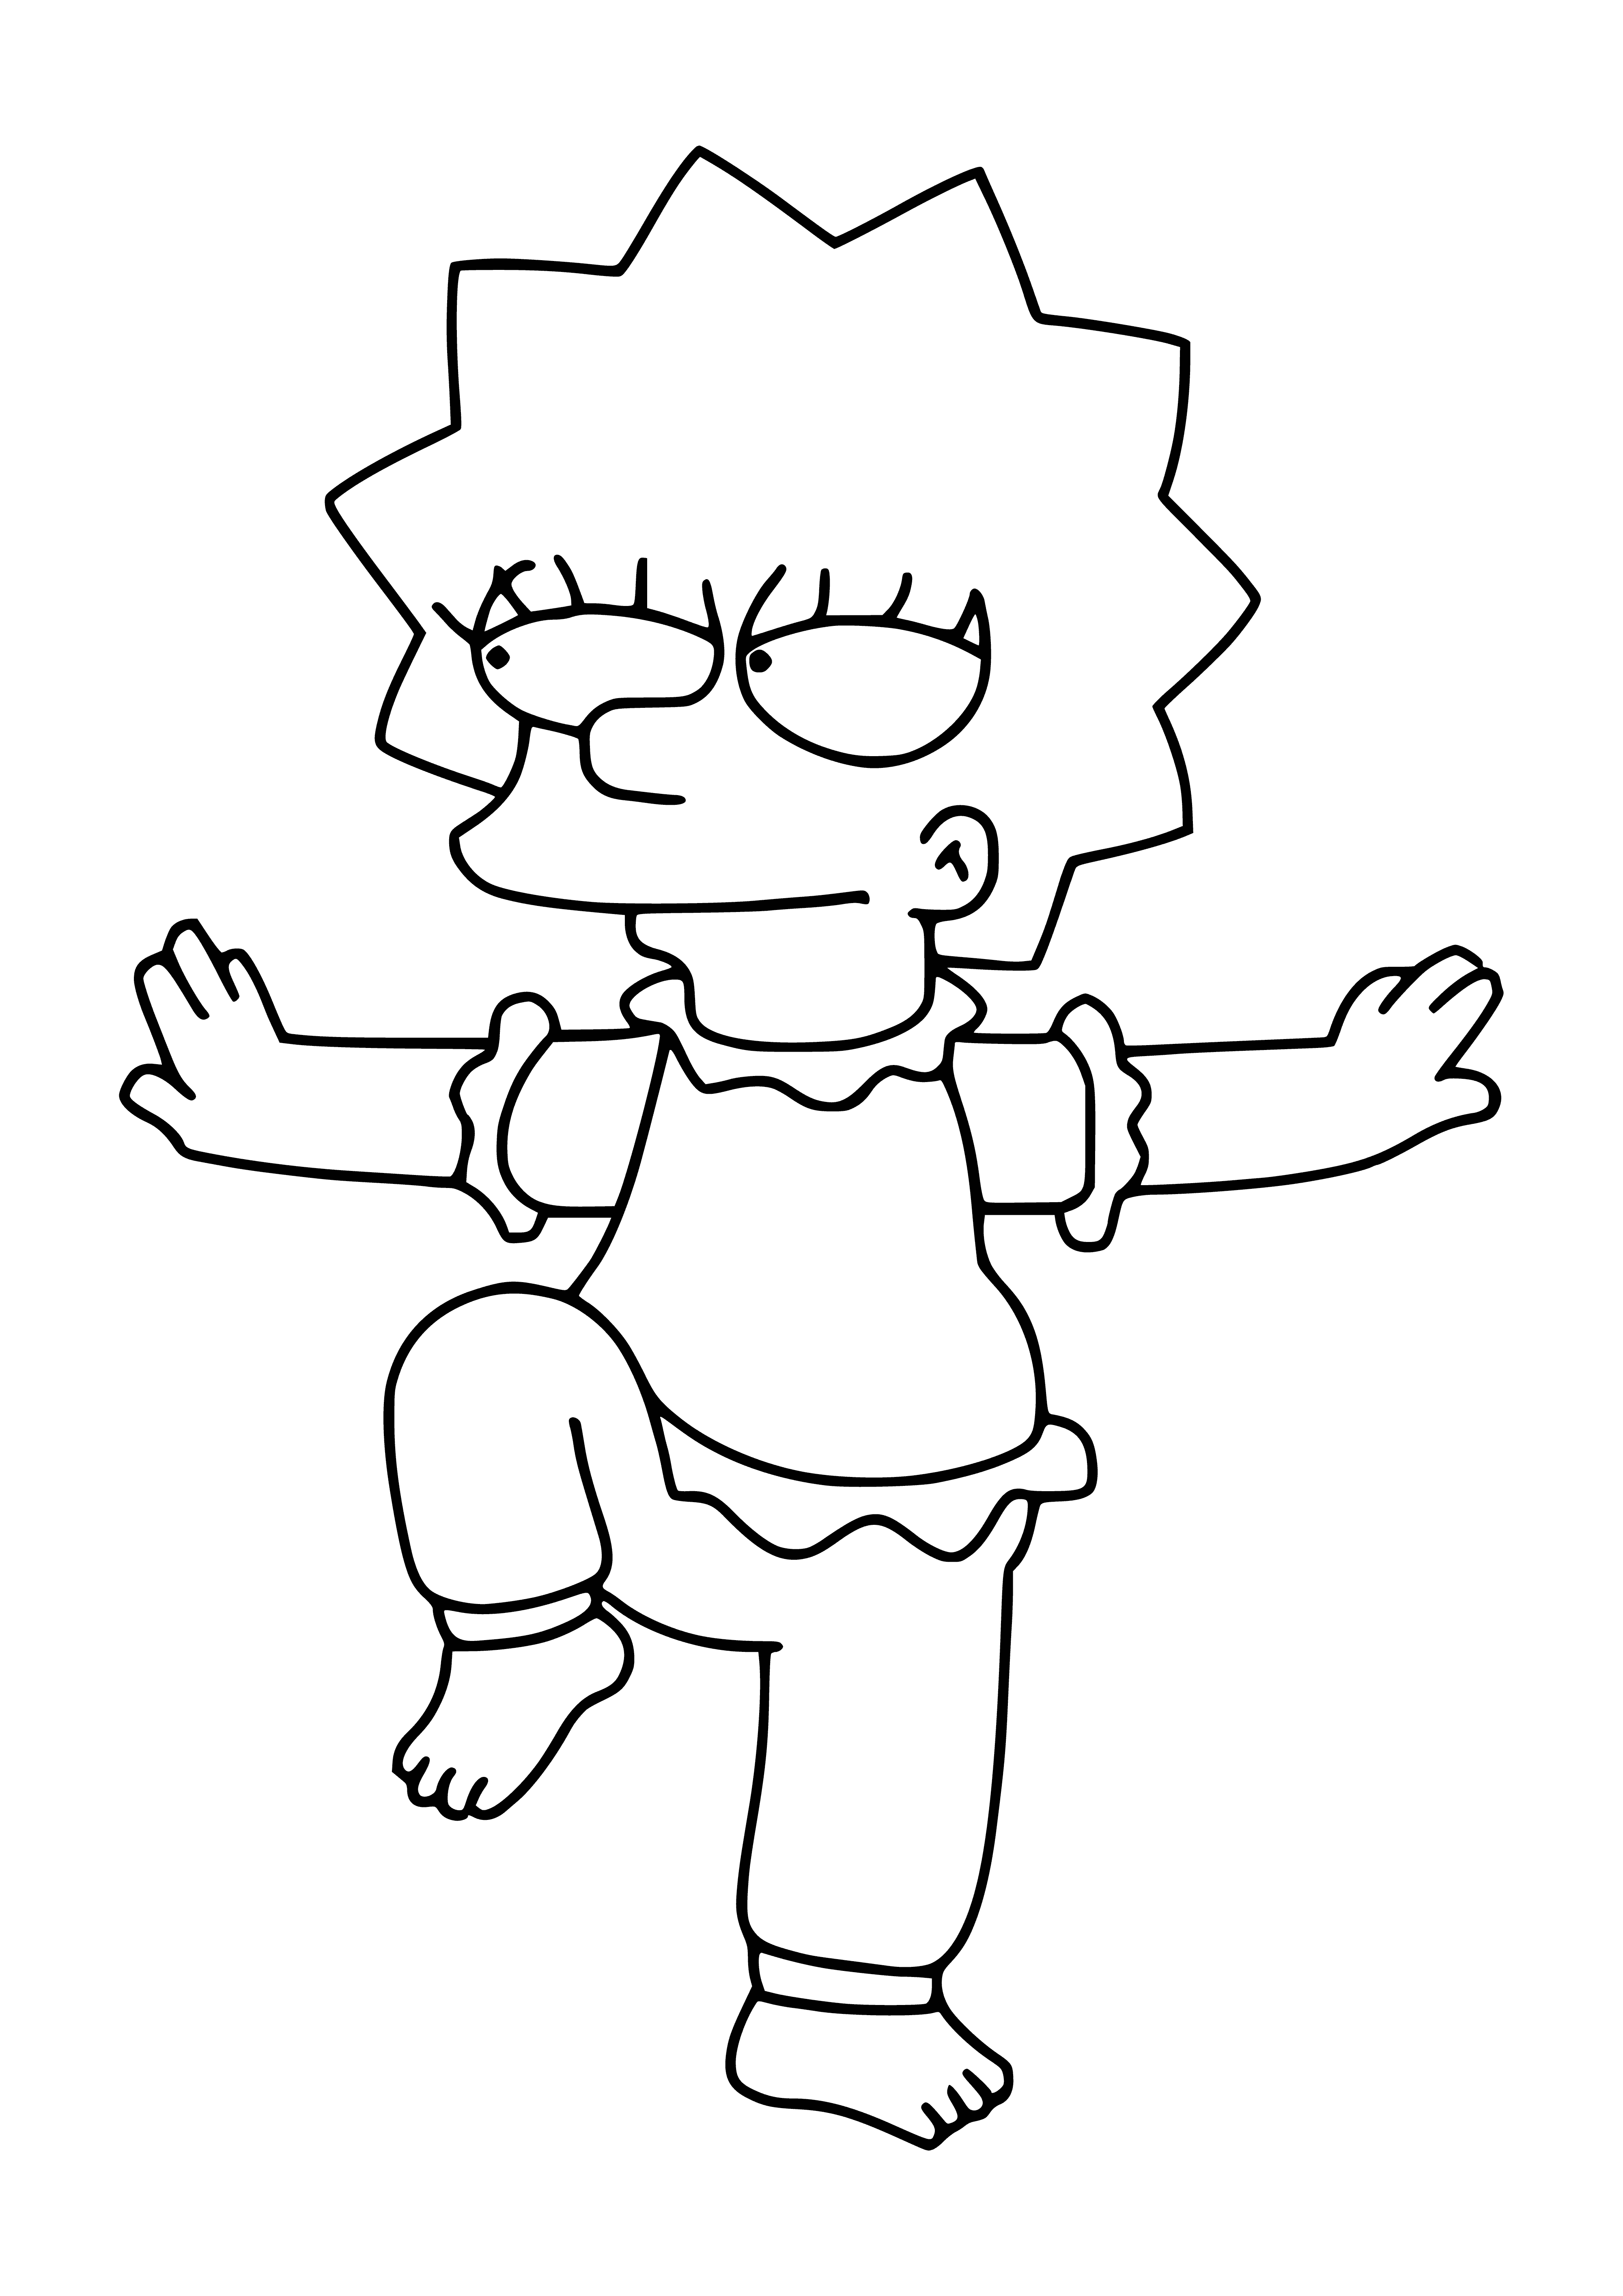 Lisa does yoga coloring page